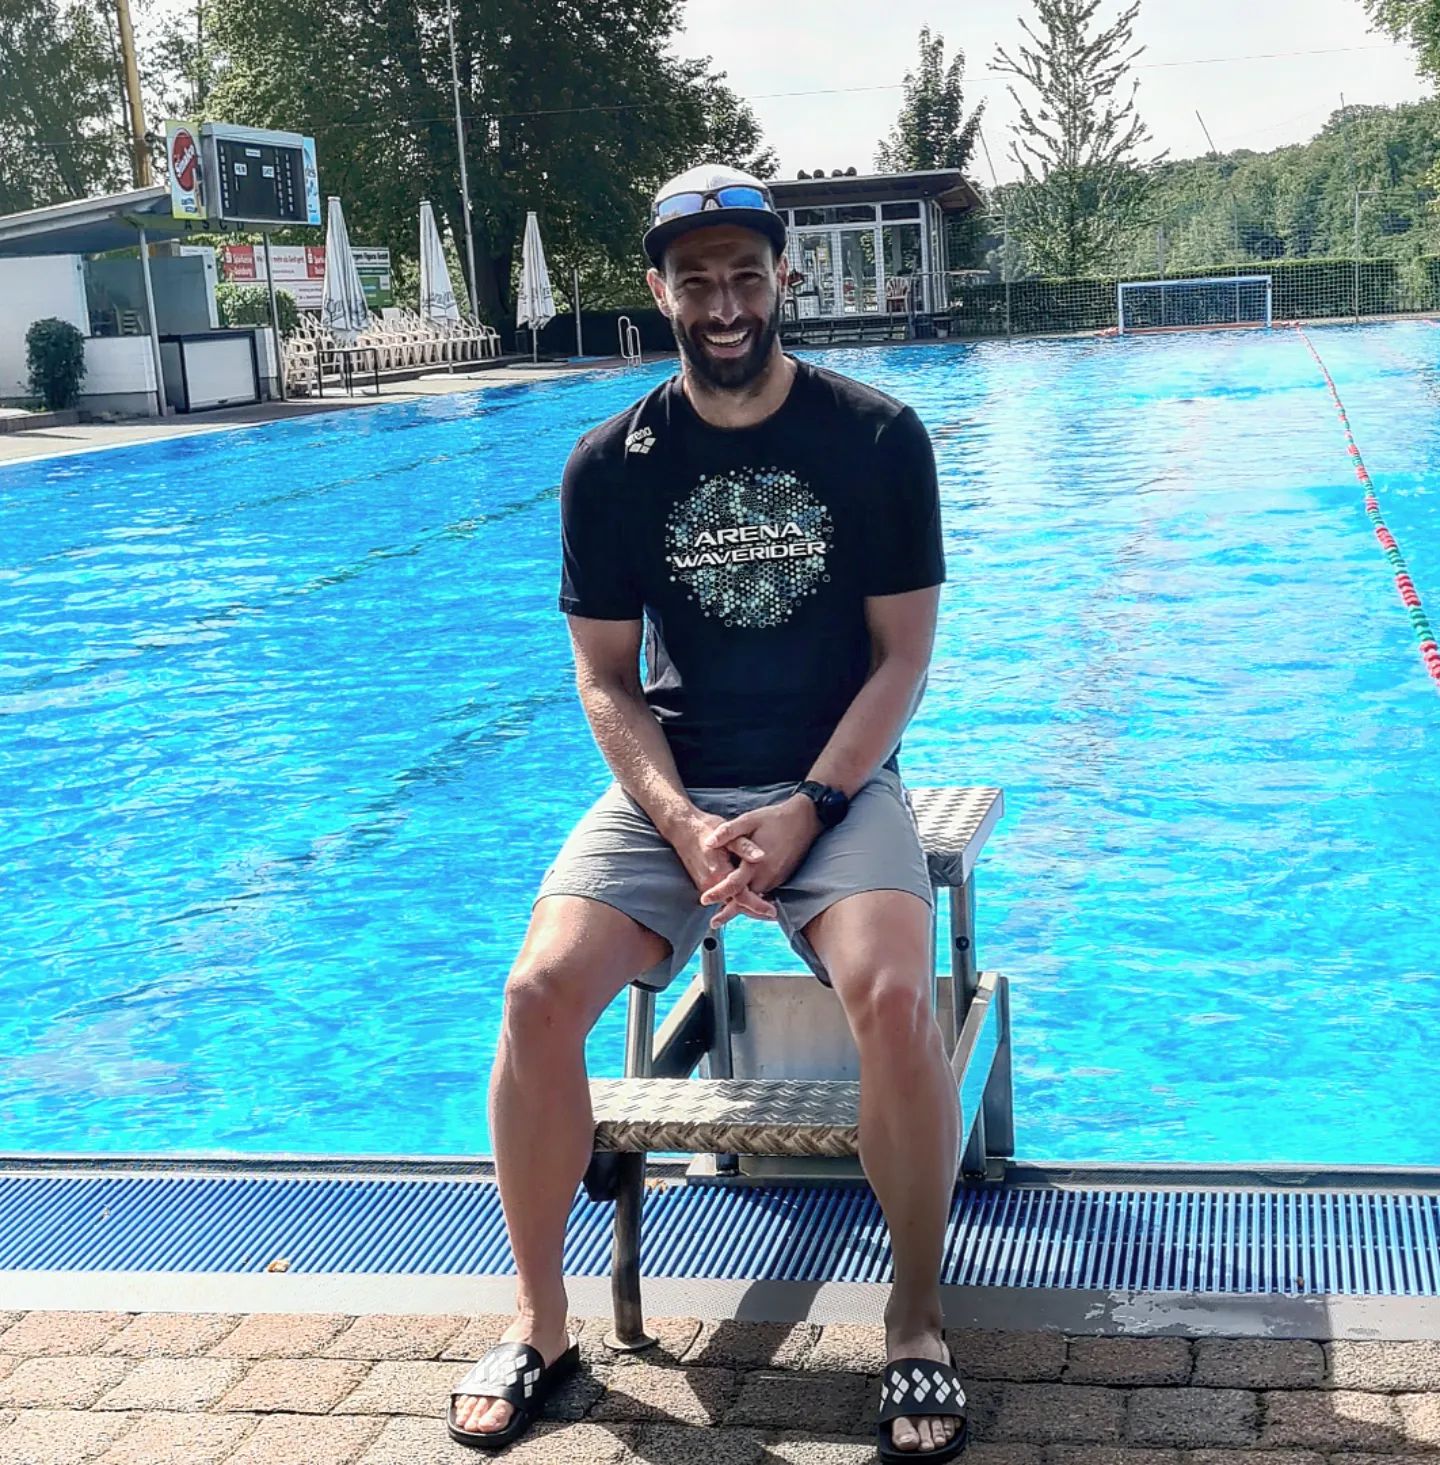 Last swim session in the pool for a longer time. 🏊🏼‍♂️
Thanks @asc_duisburg for hosting me in your pool as my home pool @duisburgersv98 wasn't ready.
Awesome conditions in a perfect temperatured 50m pool. 🤙🏼🏊🏼‍♂️ Definitely a big part of my current strong swim performances 💪🏽
Thank you @asc_duisburg for making this happen.